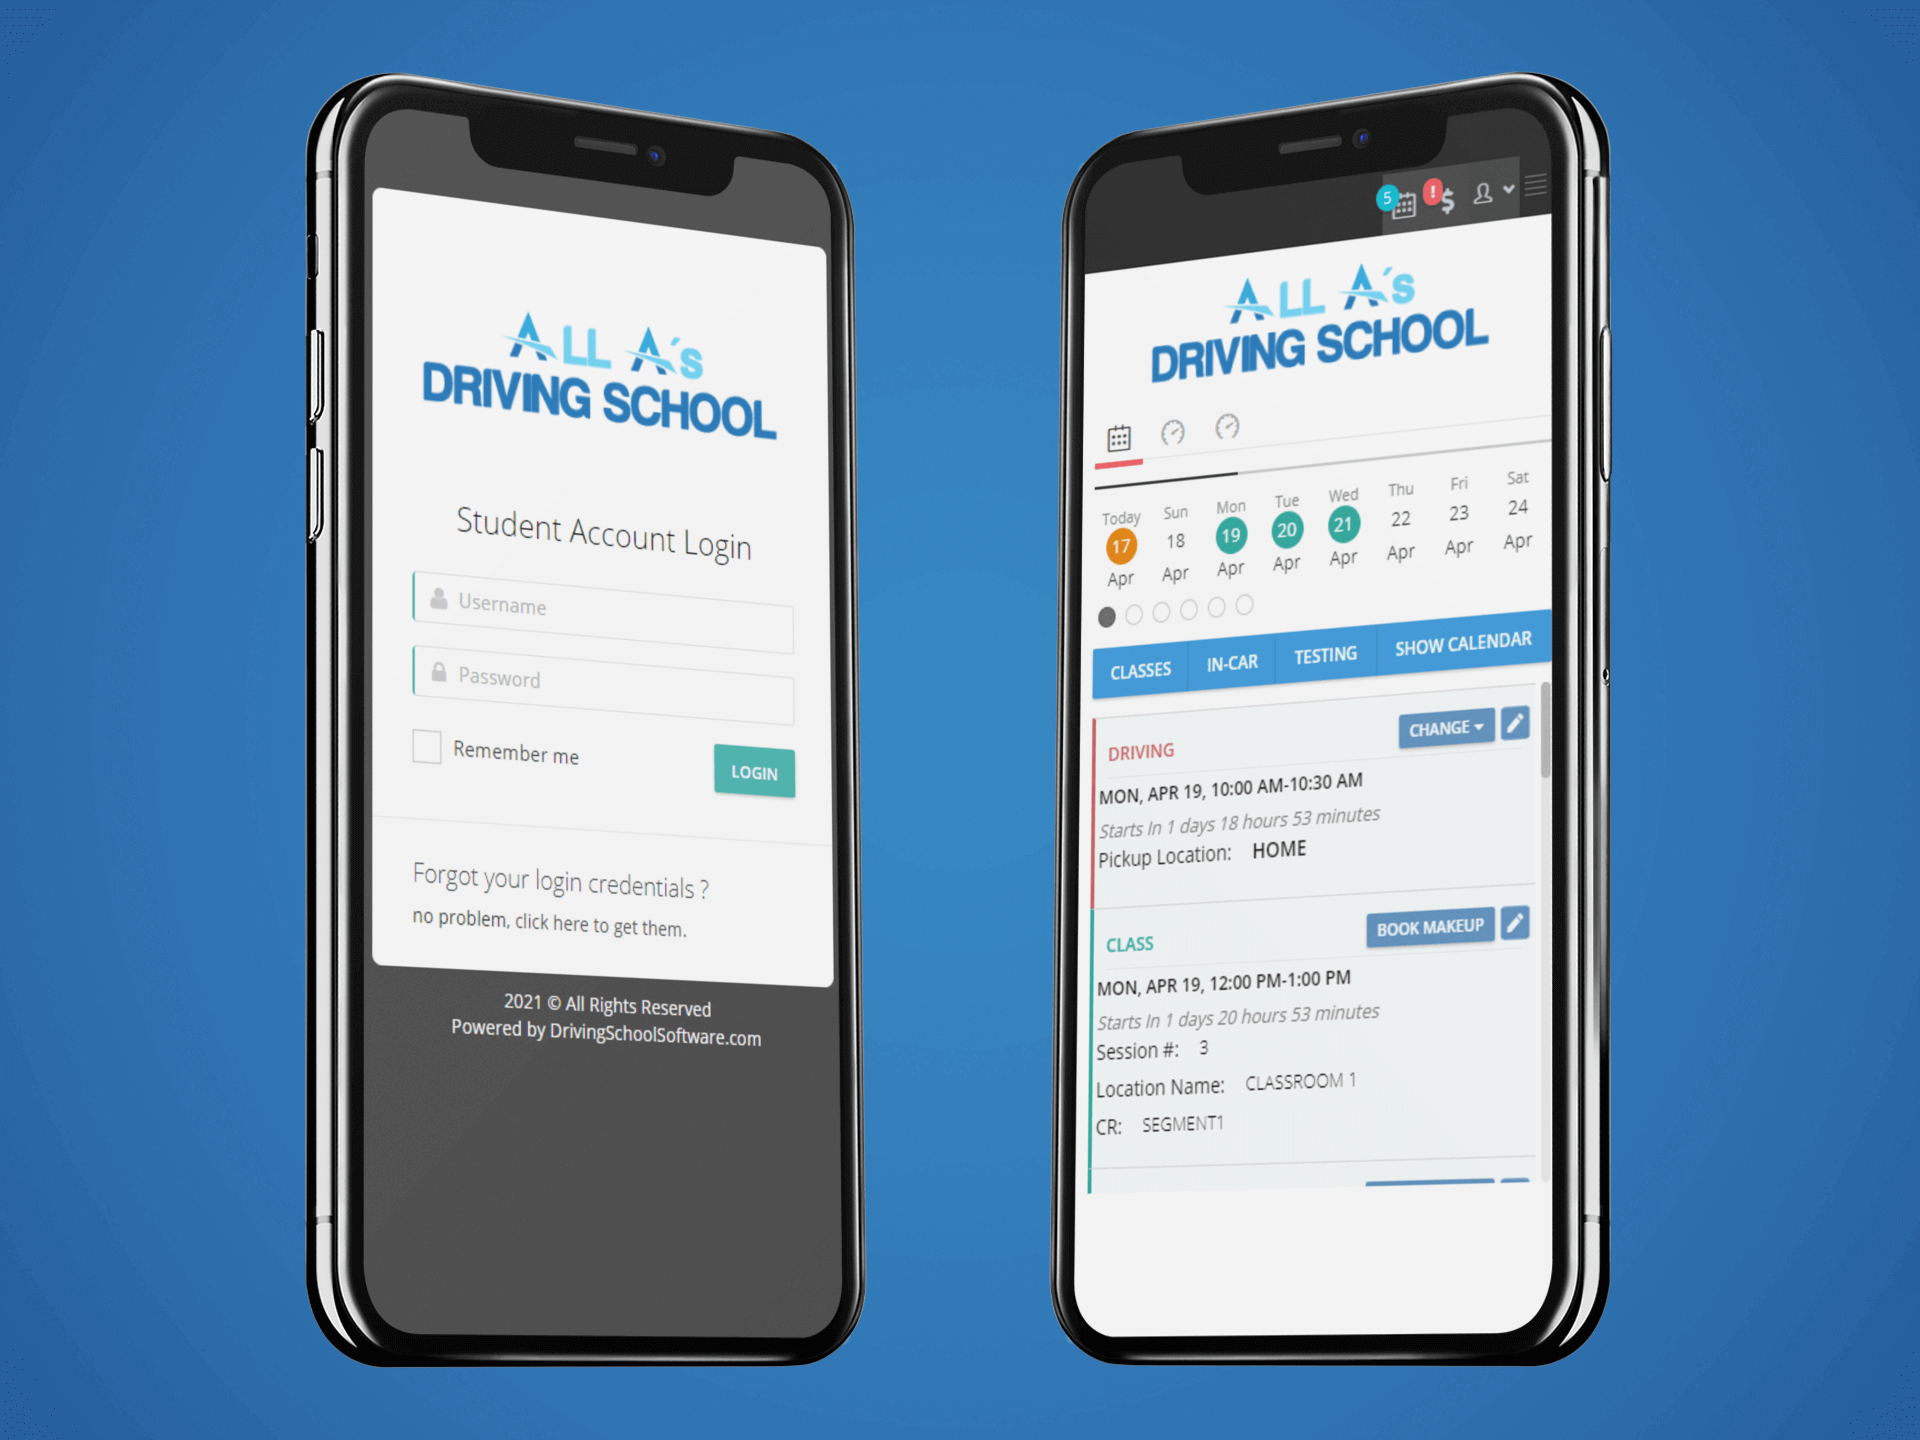 All A's Driving School